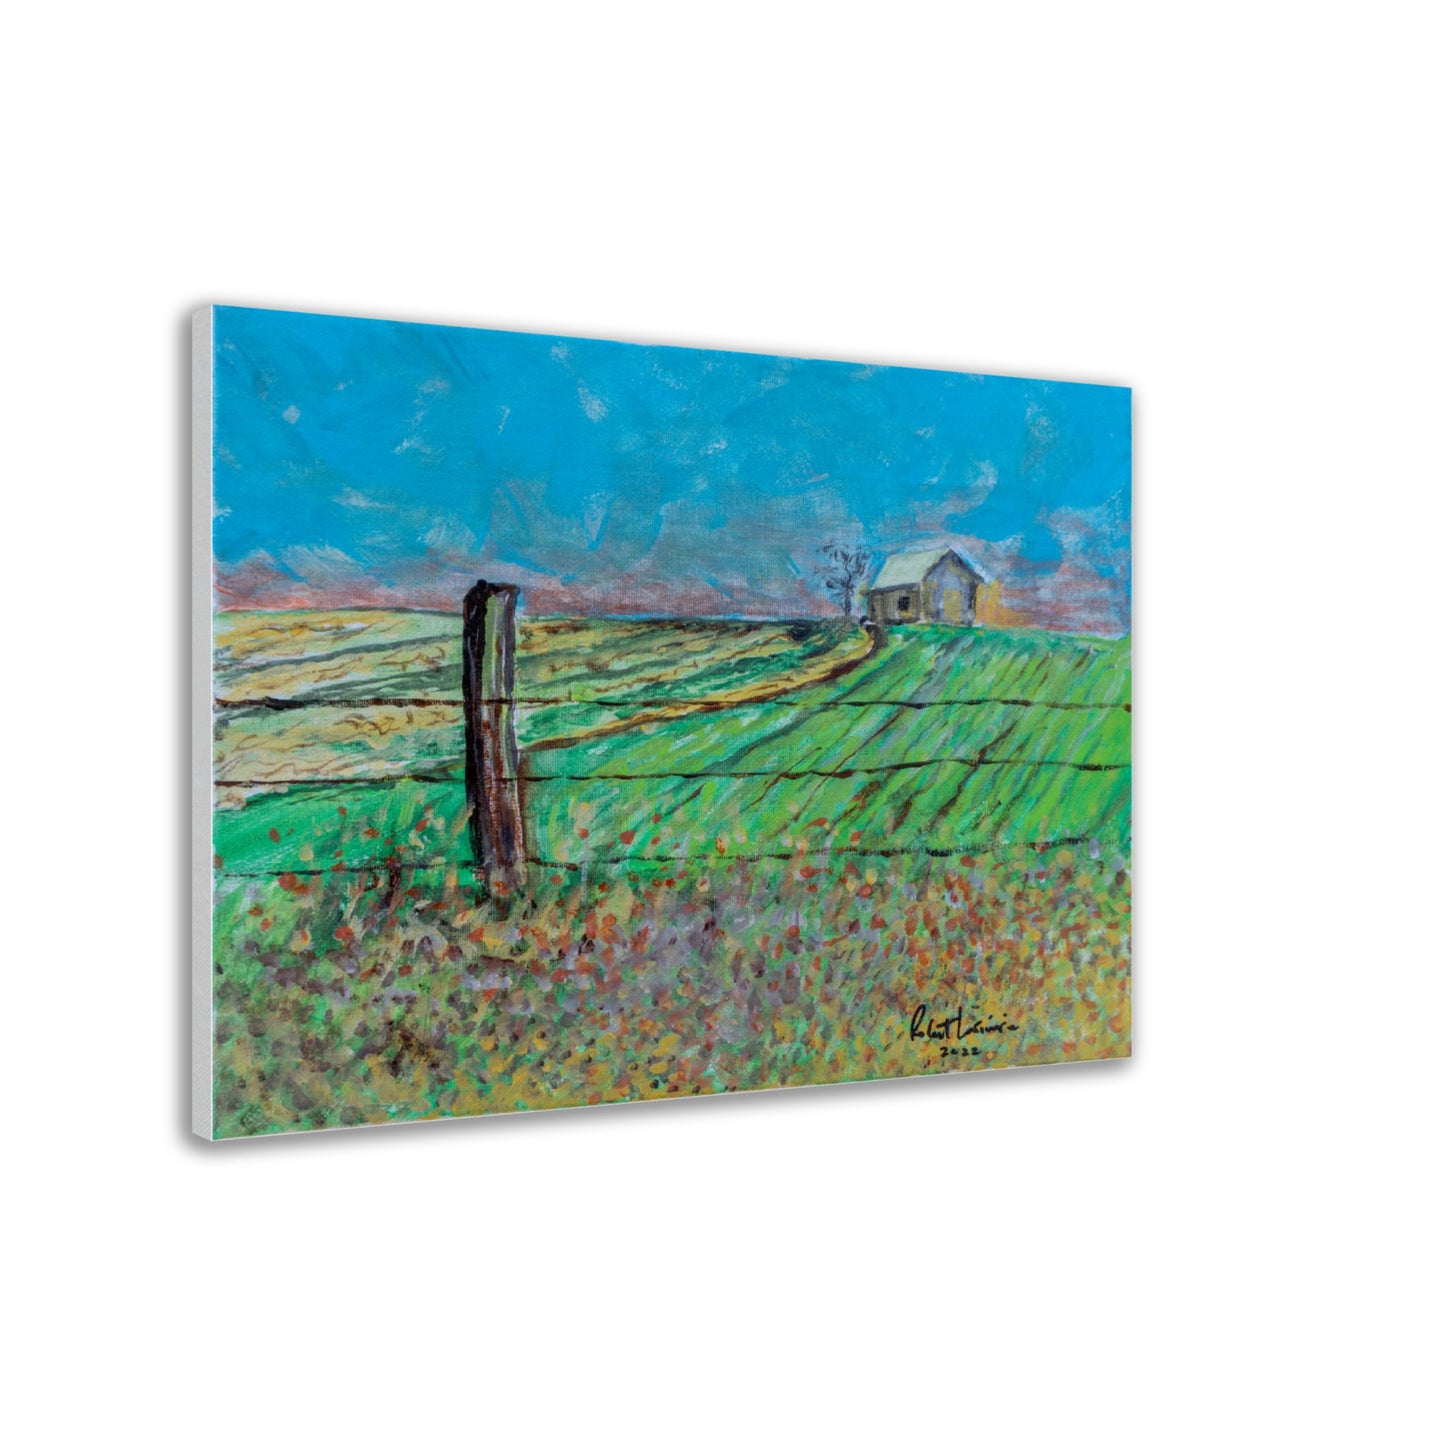 Lonely Shed & Barb Wire Fence - Canvas